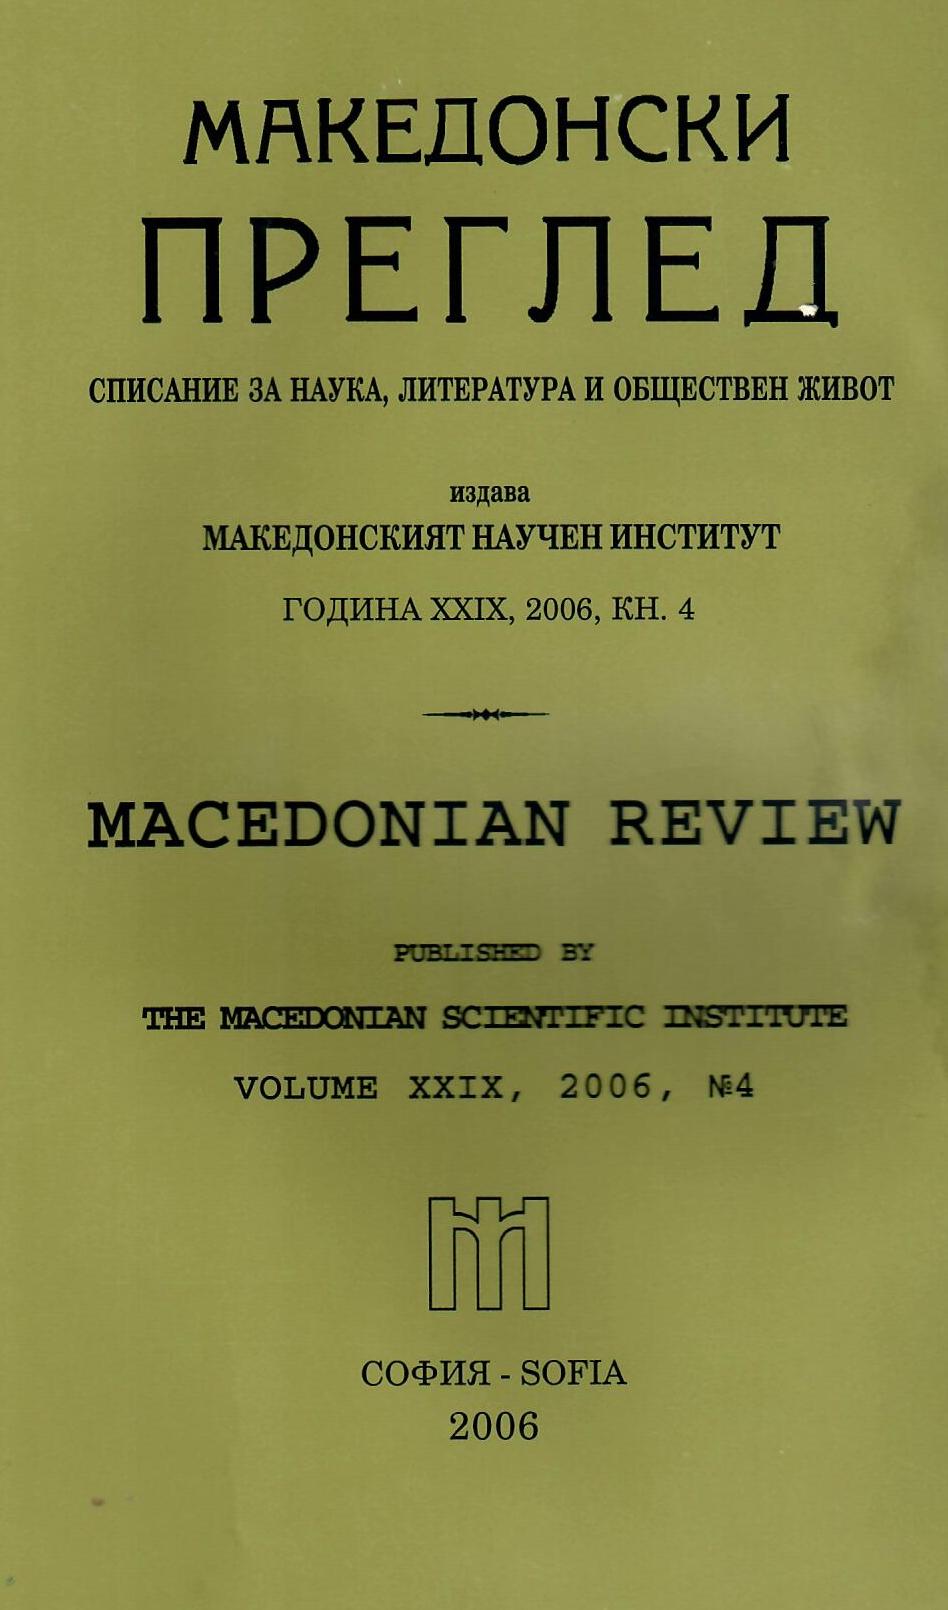 The National Liberation Movement of the Macedonian and Thrace Bulgarians 1878 — 1944, S., Vol. I, 1994, 306 p.; Vol. II, 1995, 423 p., Vol. III, 1997, 415 p.; Vol. IV, 2003, 478 p. Cover Image